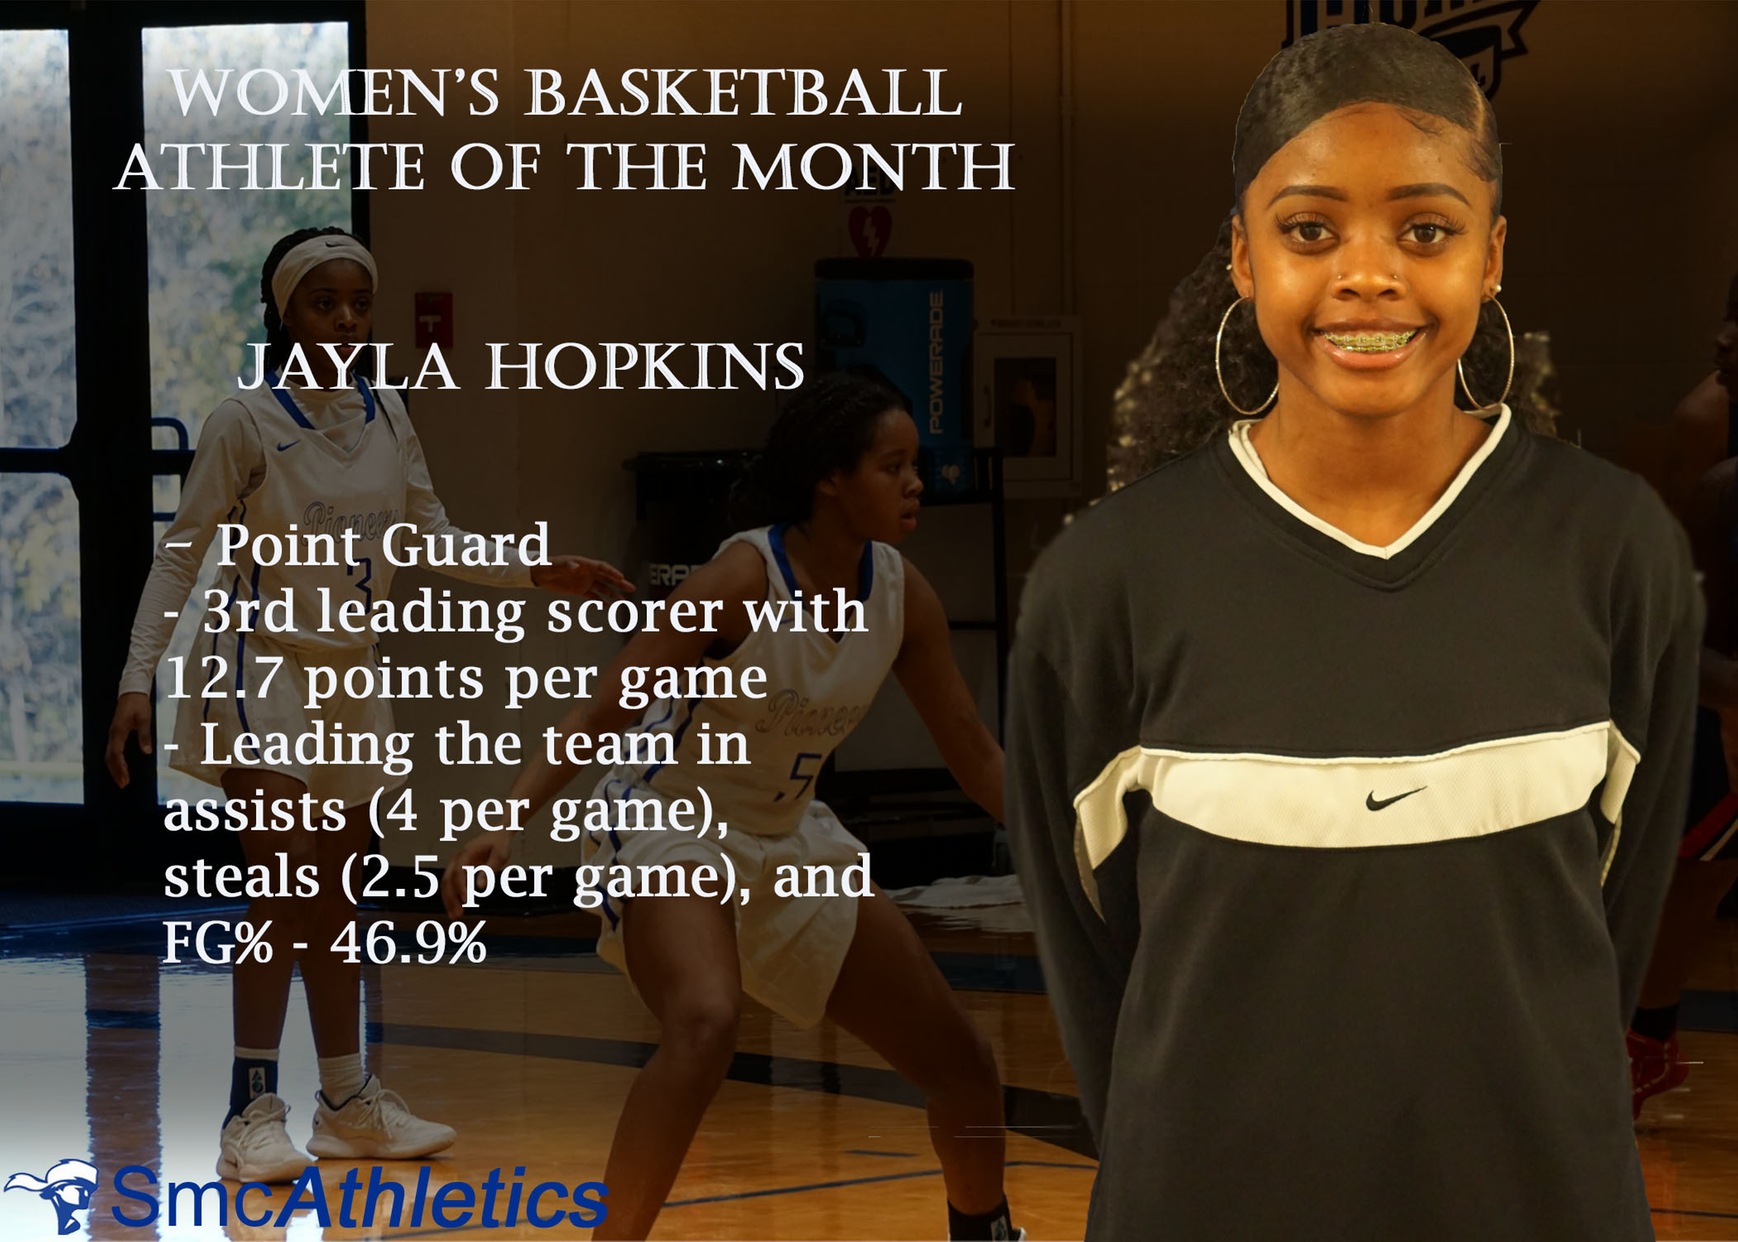 Women's Basketball Athlete of the Month